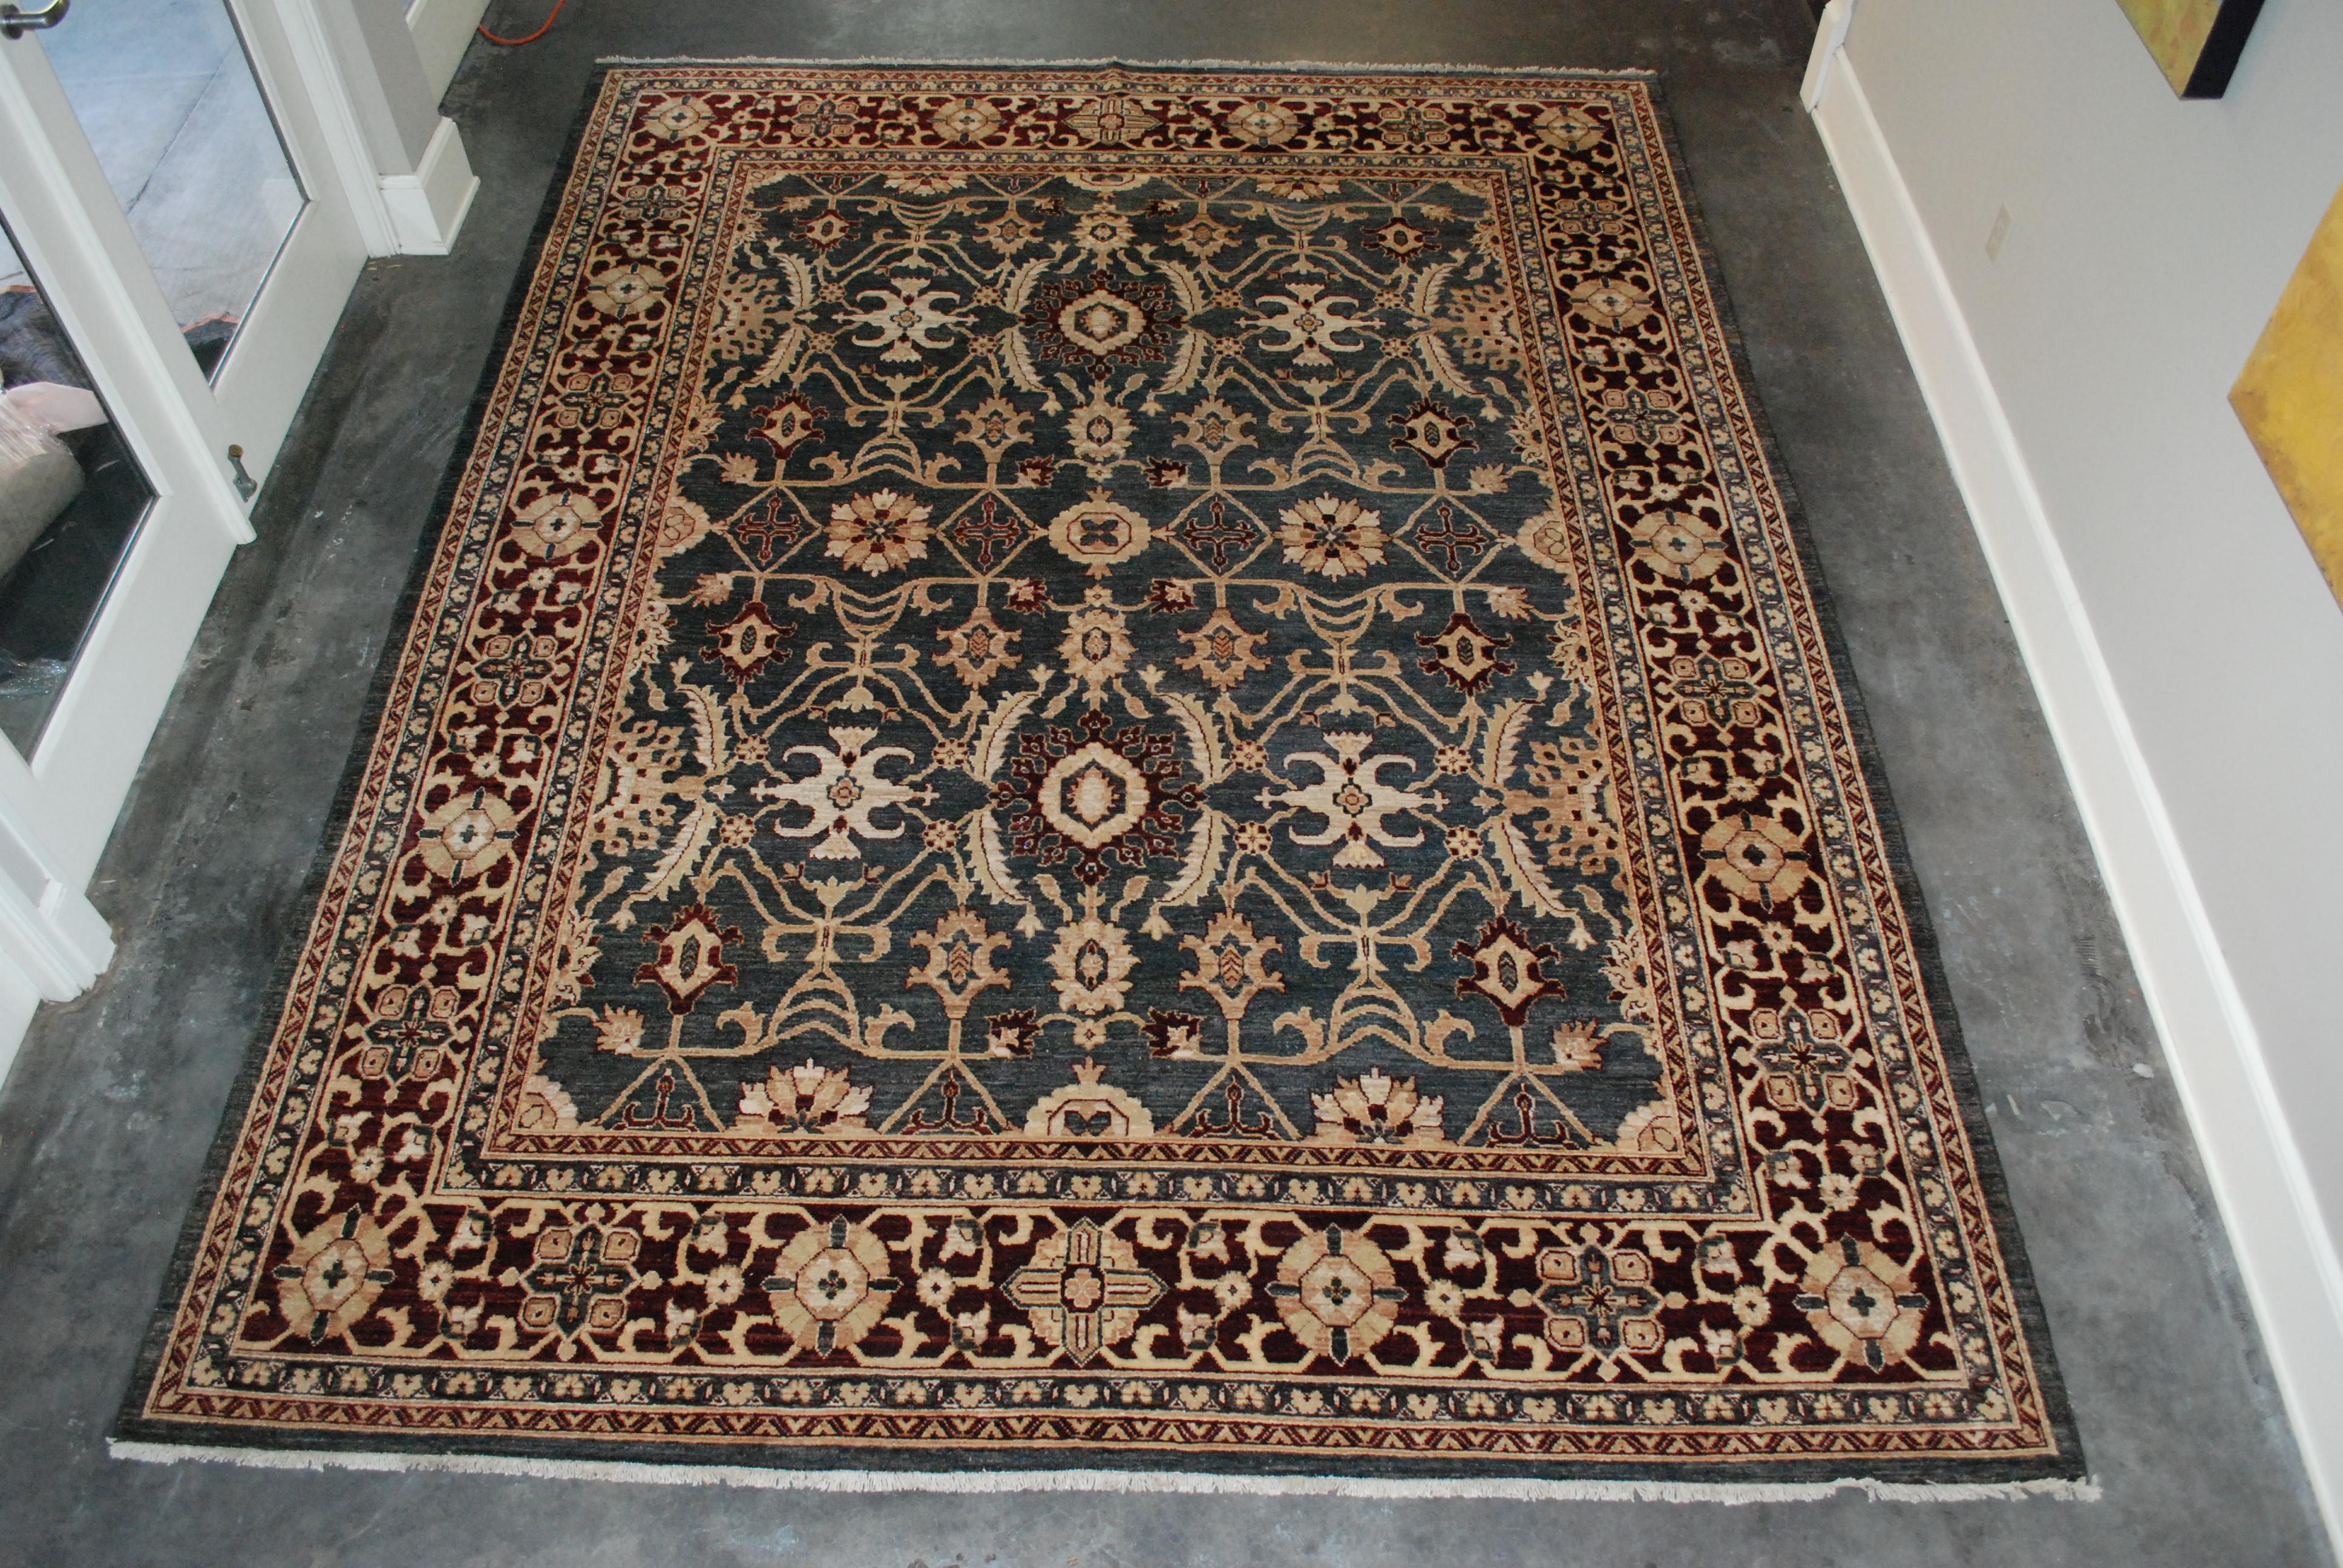 Chobi hand knotted wool rug. Overall pattern in mostly charcoal grey with rust, beige, gold and burgandy. Note the images of the rug photographed from both weft directions to show light and dark direction of weave. Measures: 8 x 11.